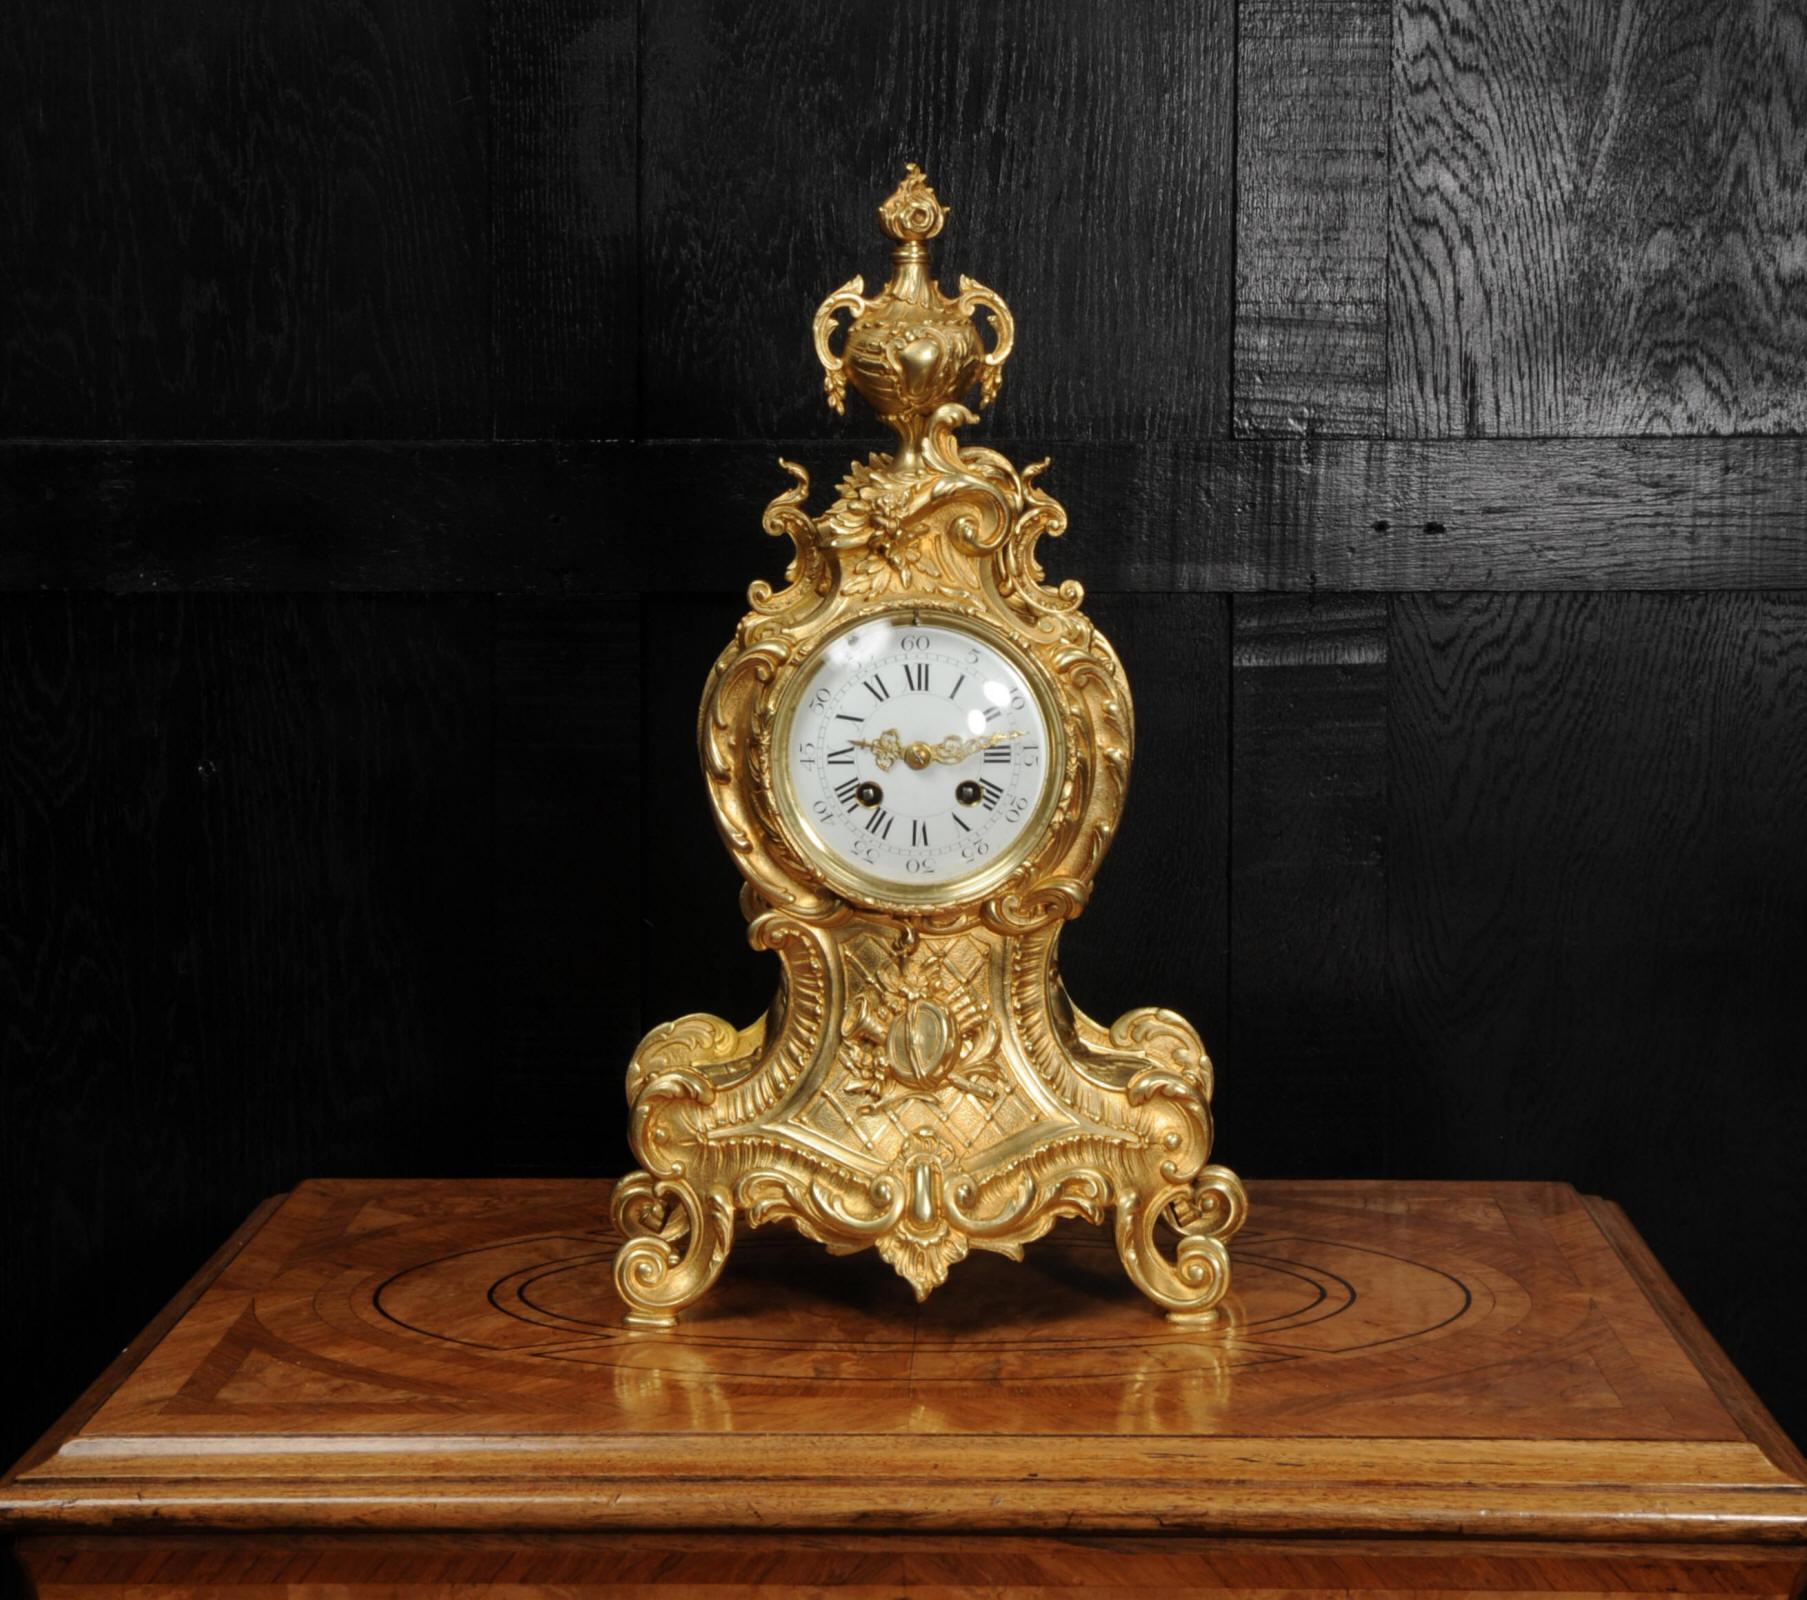 A superb original antique French Rococo clock, circa 1900. It is beautifully modelled in gilded bronze, of waisted shape, profusely decorated with 'C' scrolls, acanthus leaves, shells and trailing foliage. To the top is an elaborate handled urn and